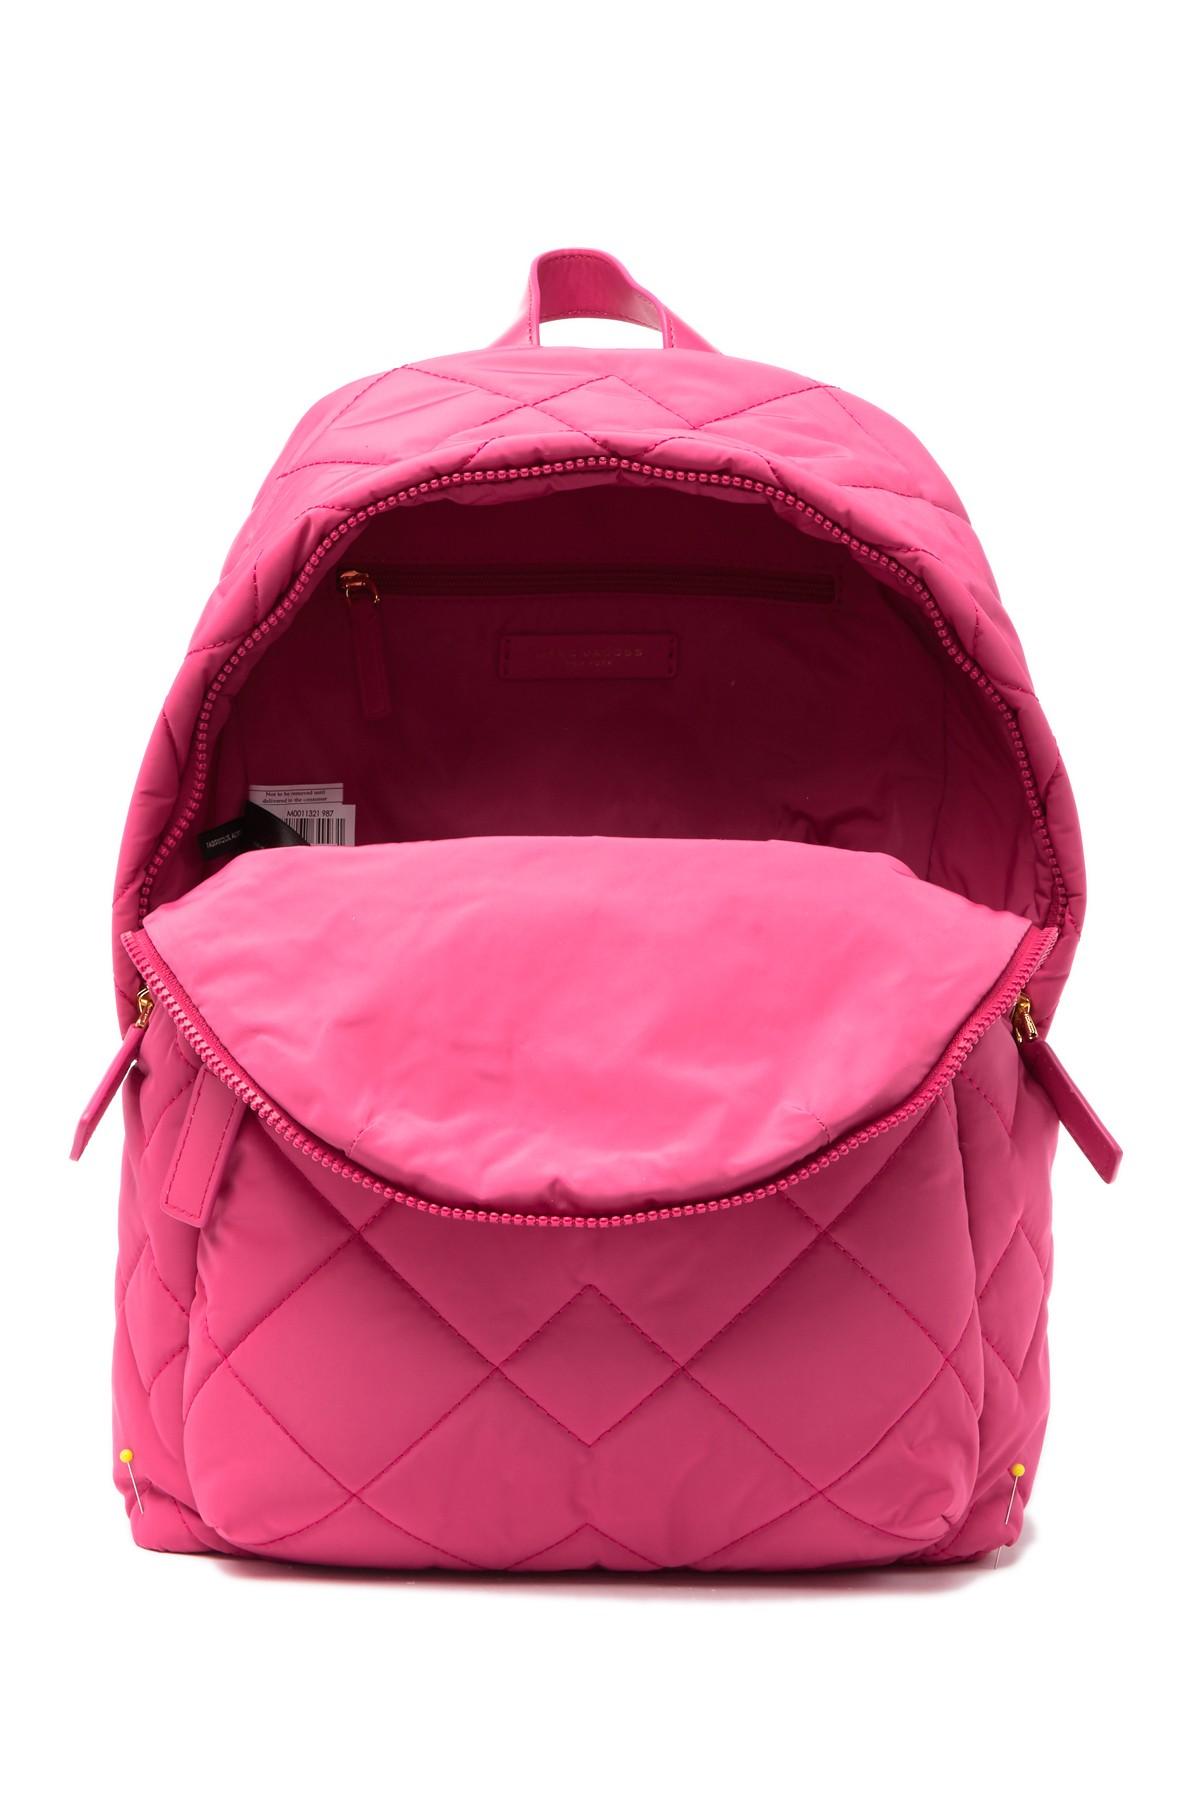 Marc Jacobs Synthetic Quilted Nylon School Backpack in Pink - Lyst